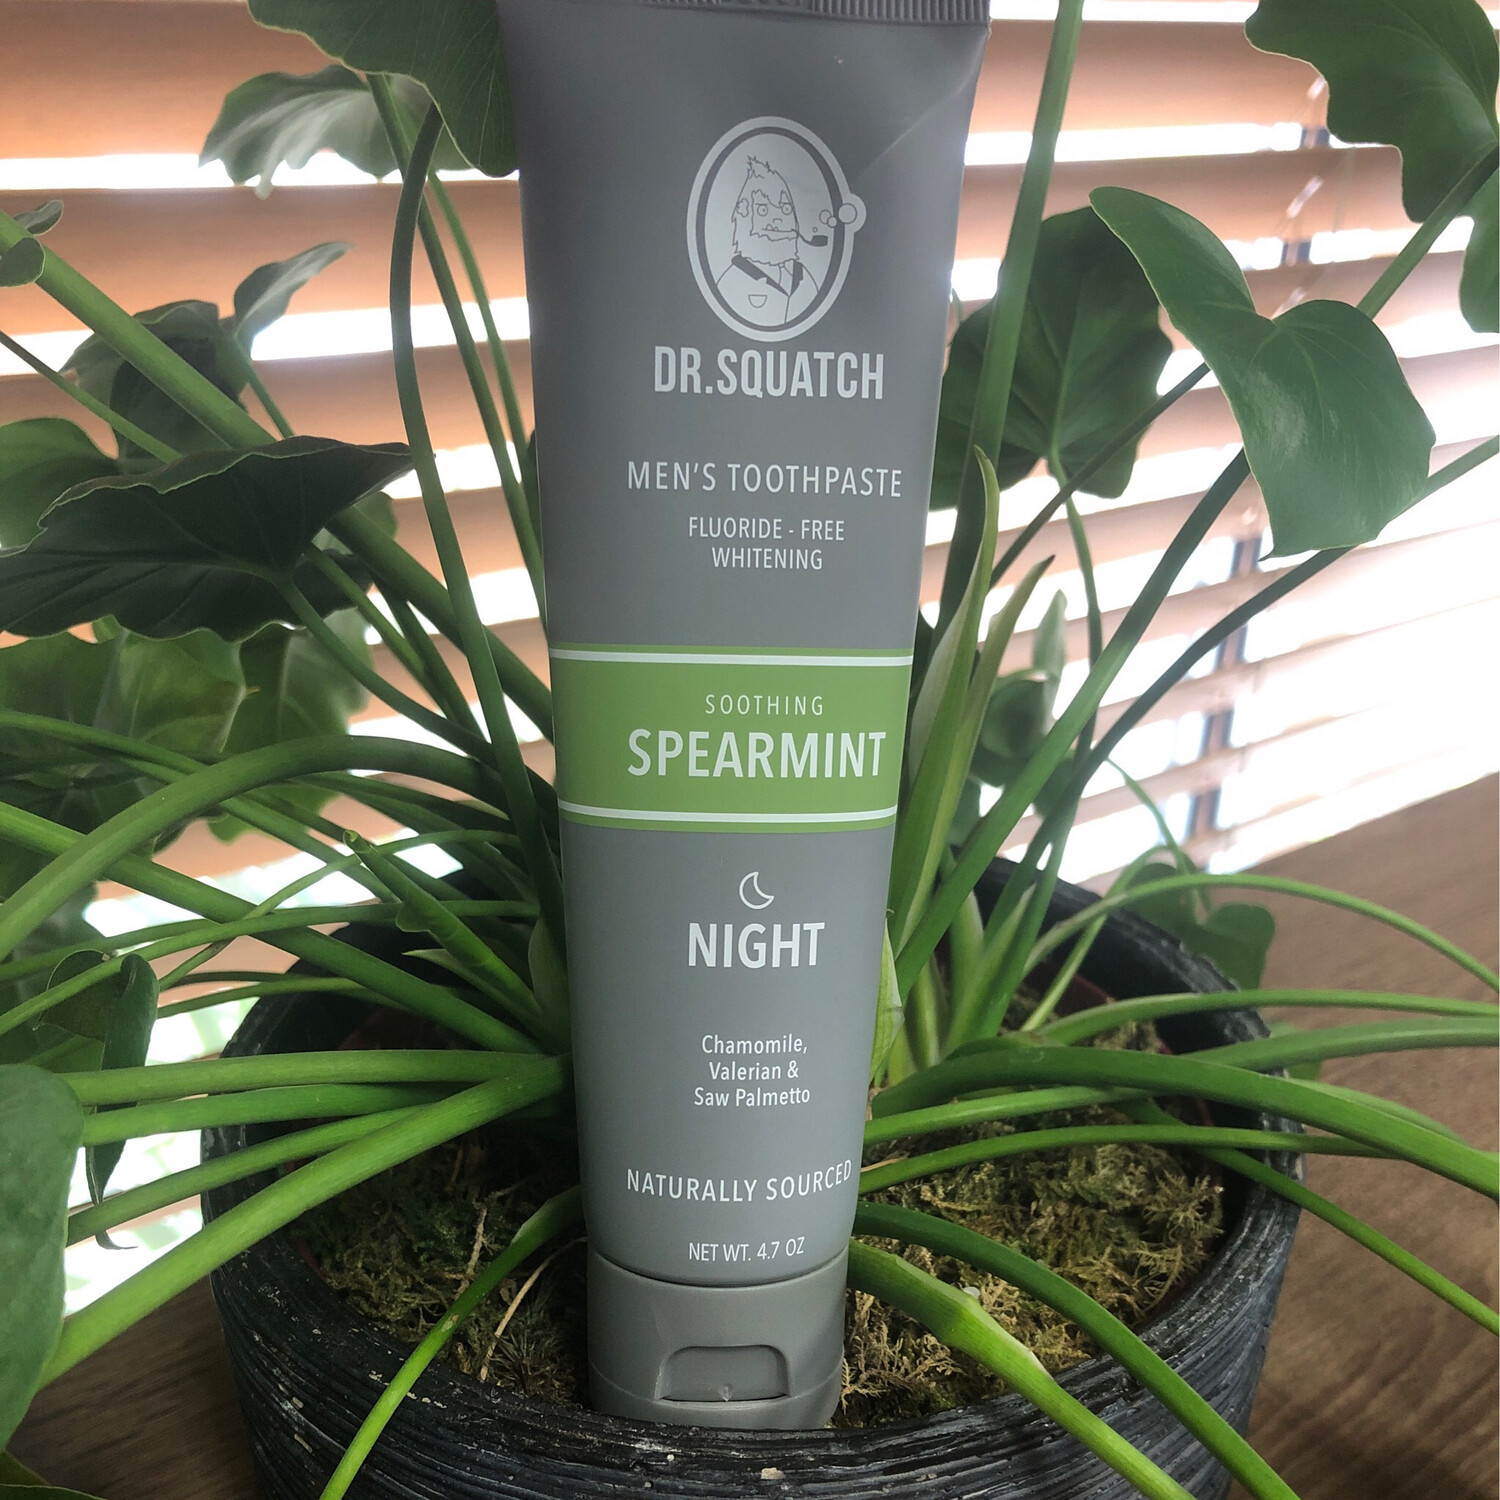 Soothing spearmint Night Toothpaste Whitening